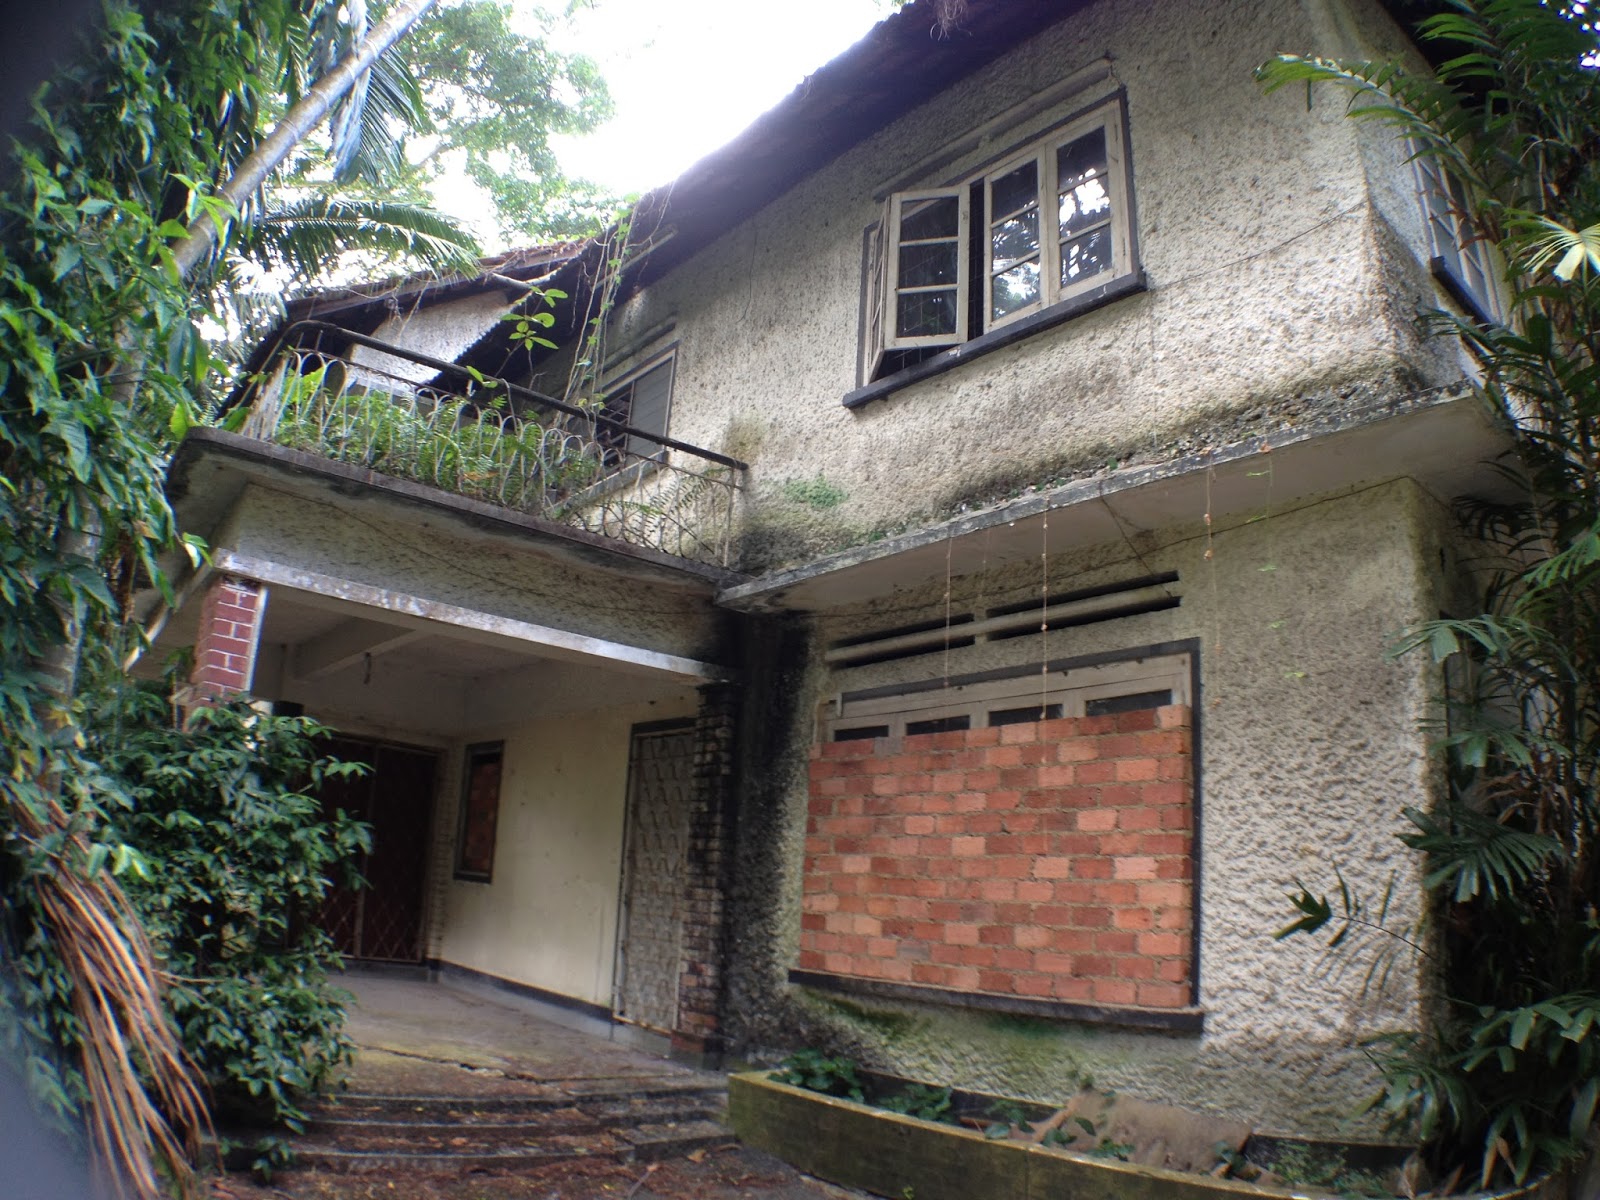 G.H.O.S.T Club SG: Clementi Road Abandoned House